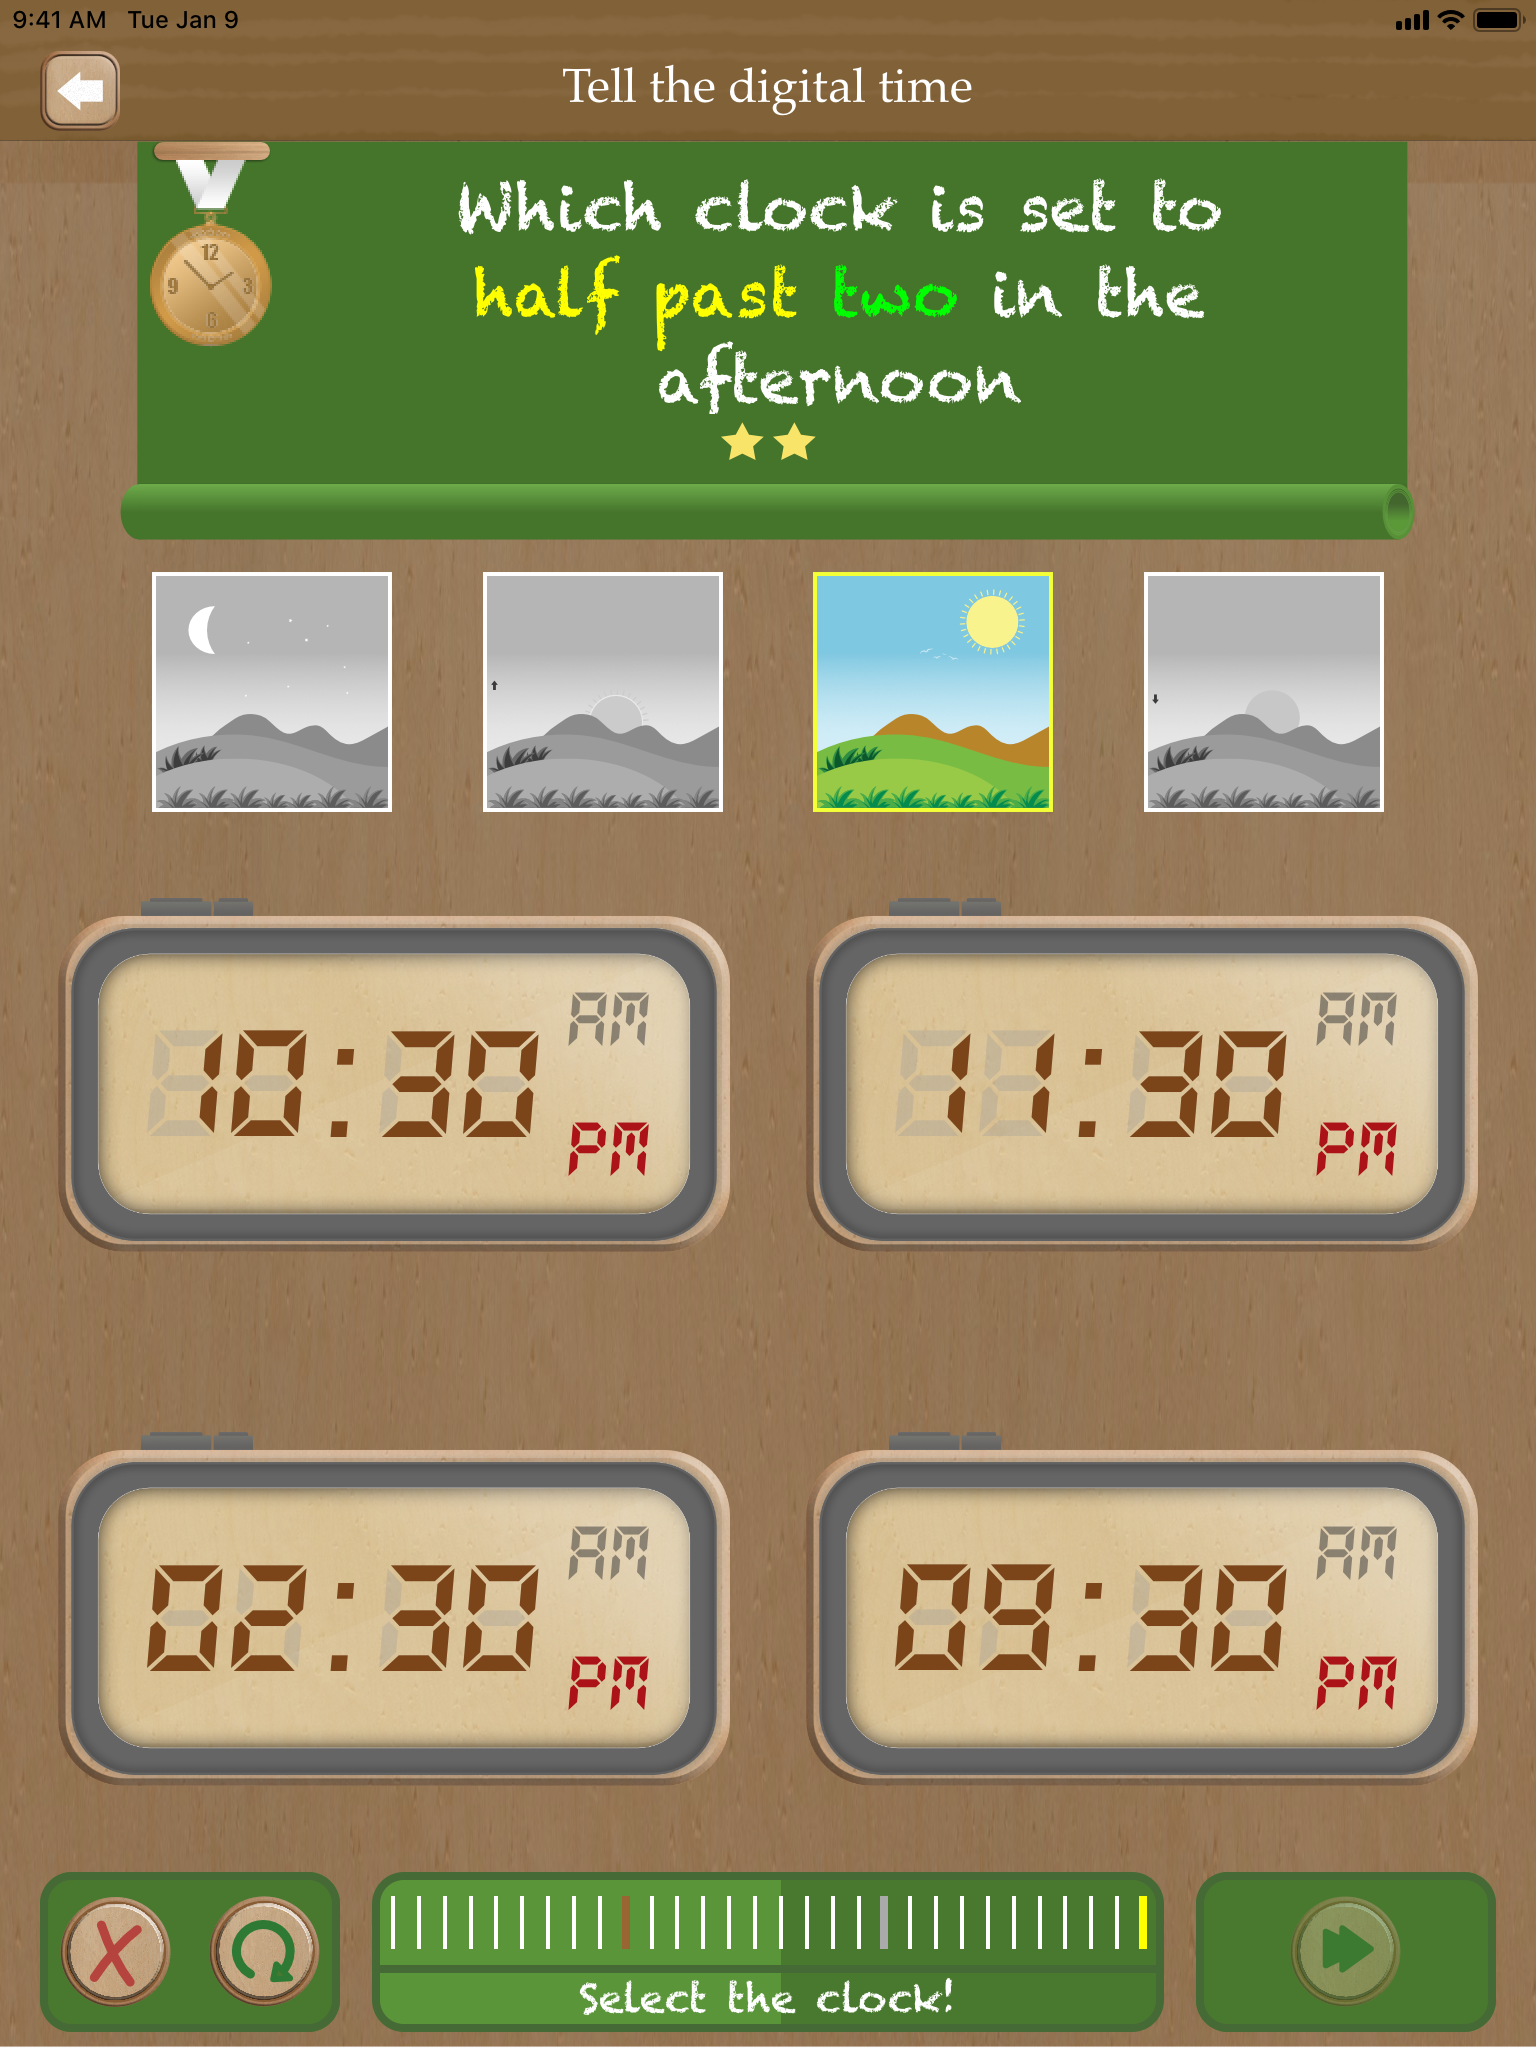 Thumbnail: Set the clock - telling time on iPad App - game type 'Which clock is set to'